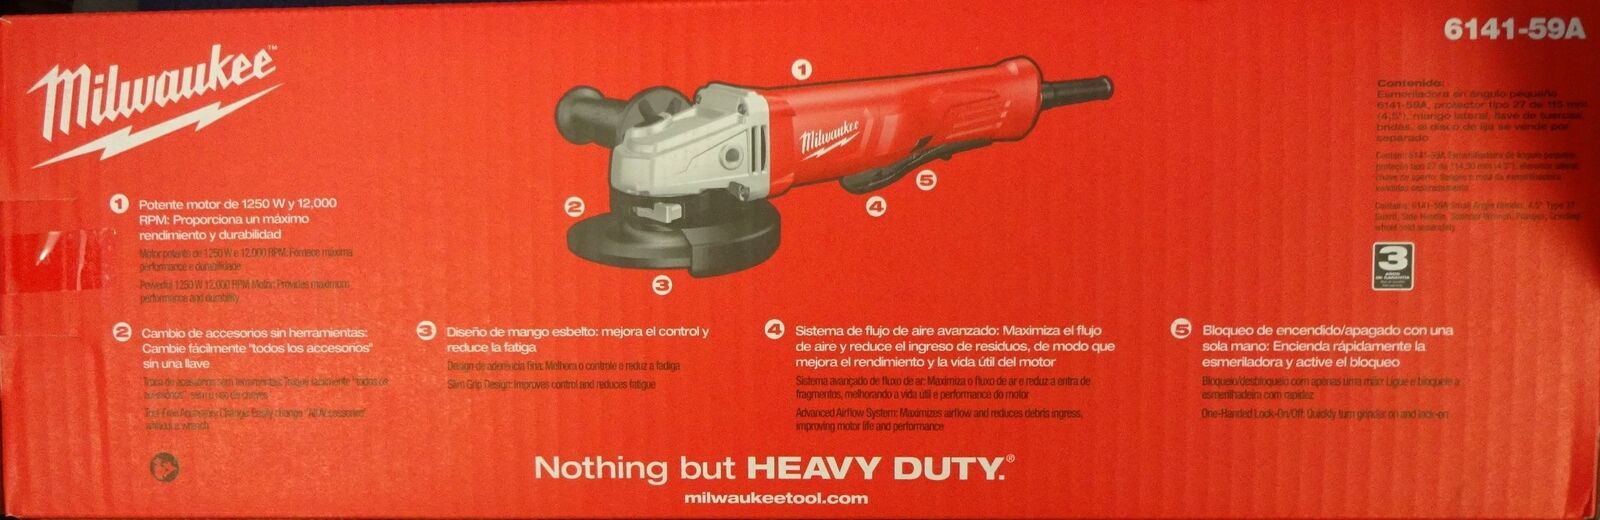 Milwaukee 6141-59A 1250W 4-1/2" Angle Grinder Paddle 220-240V Argentinian